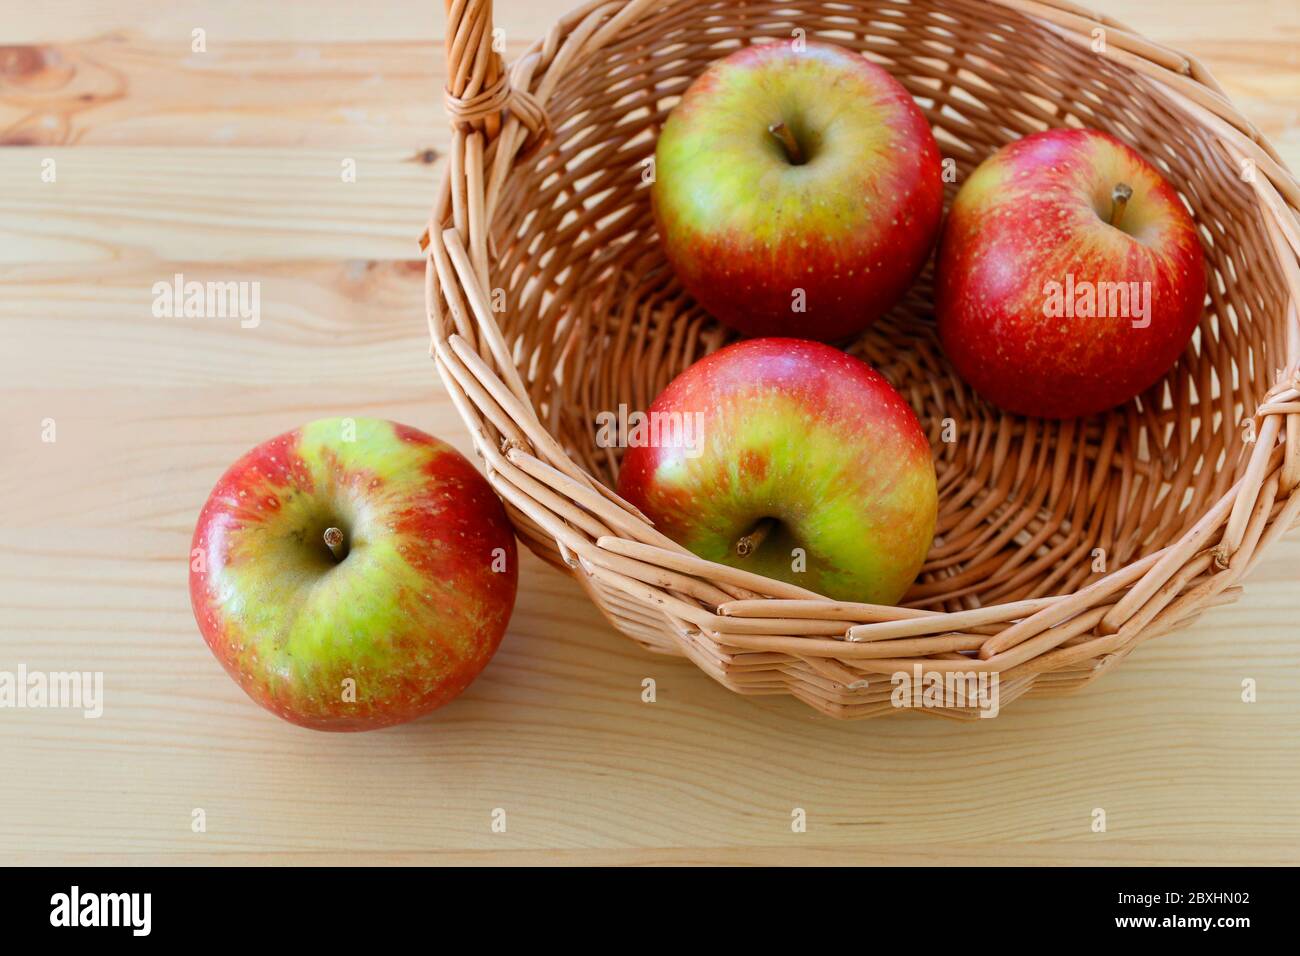 Basket with apples on wooden table, copy space. Stock Photo